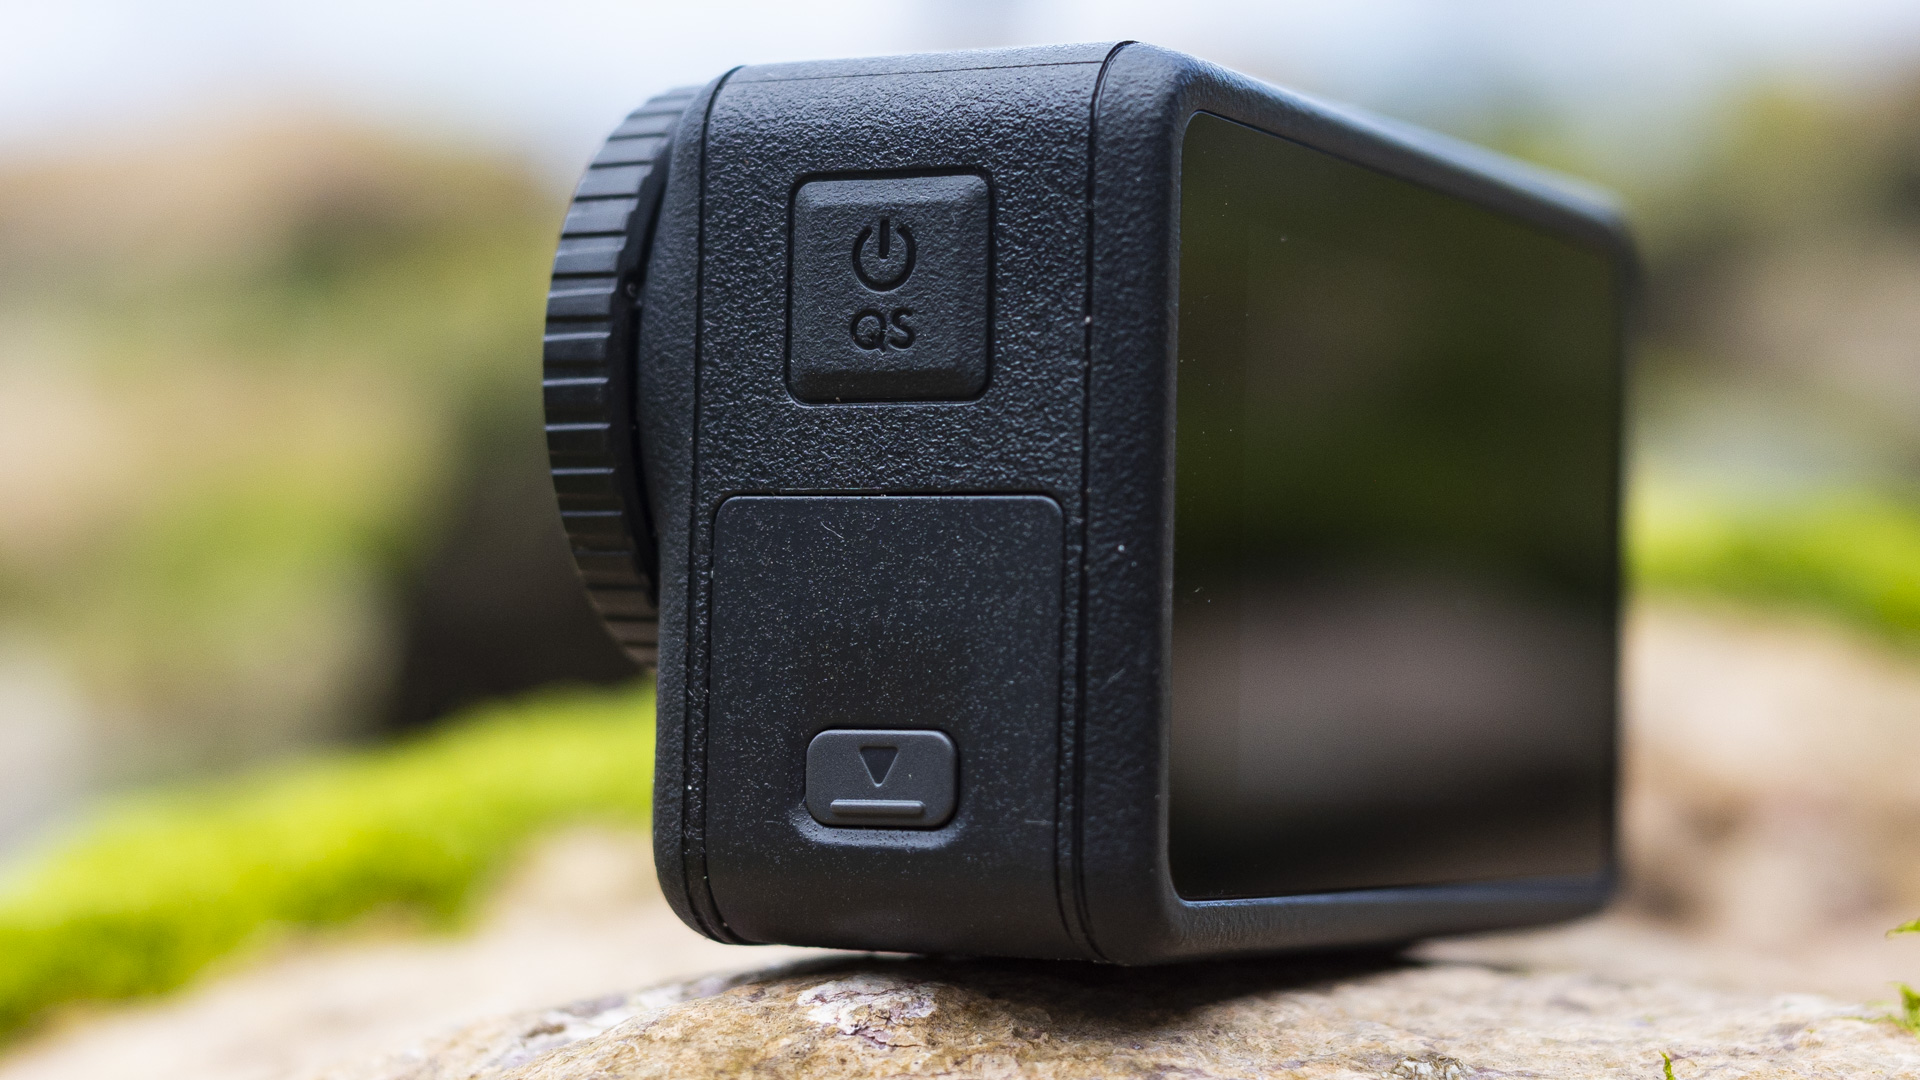 DJI Osmo Action 4 camera left side with on button and USB-C port door